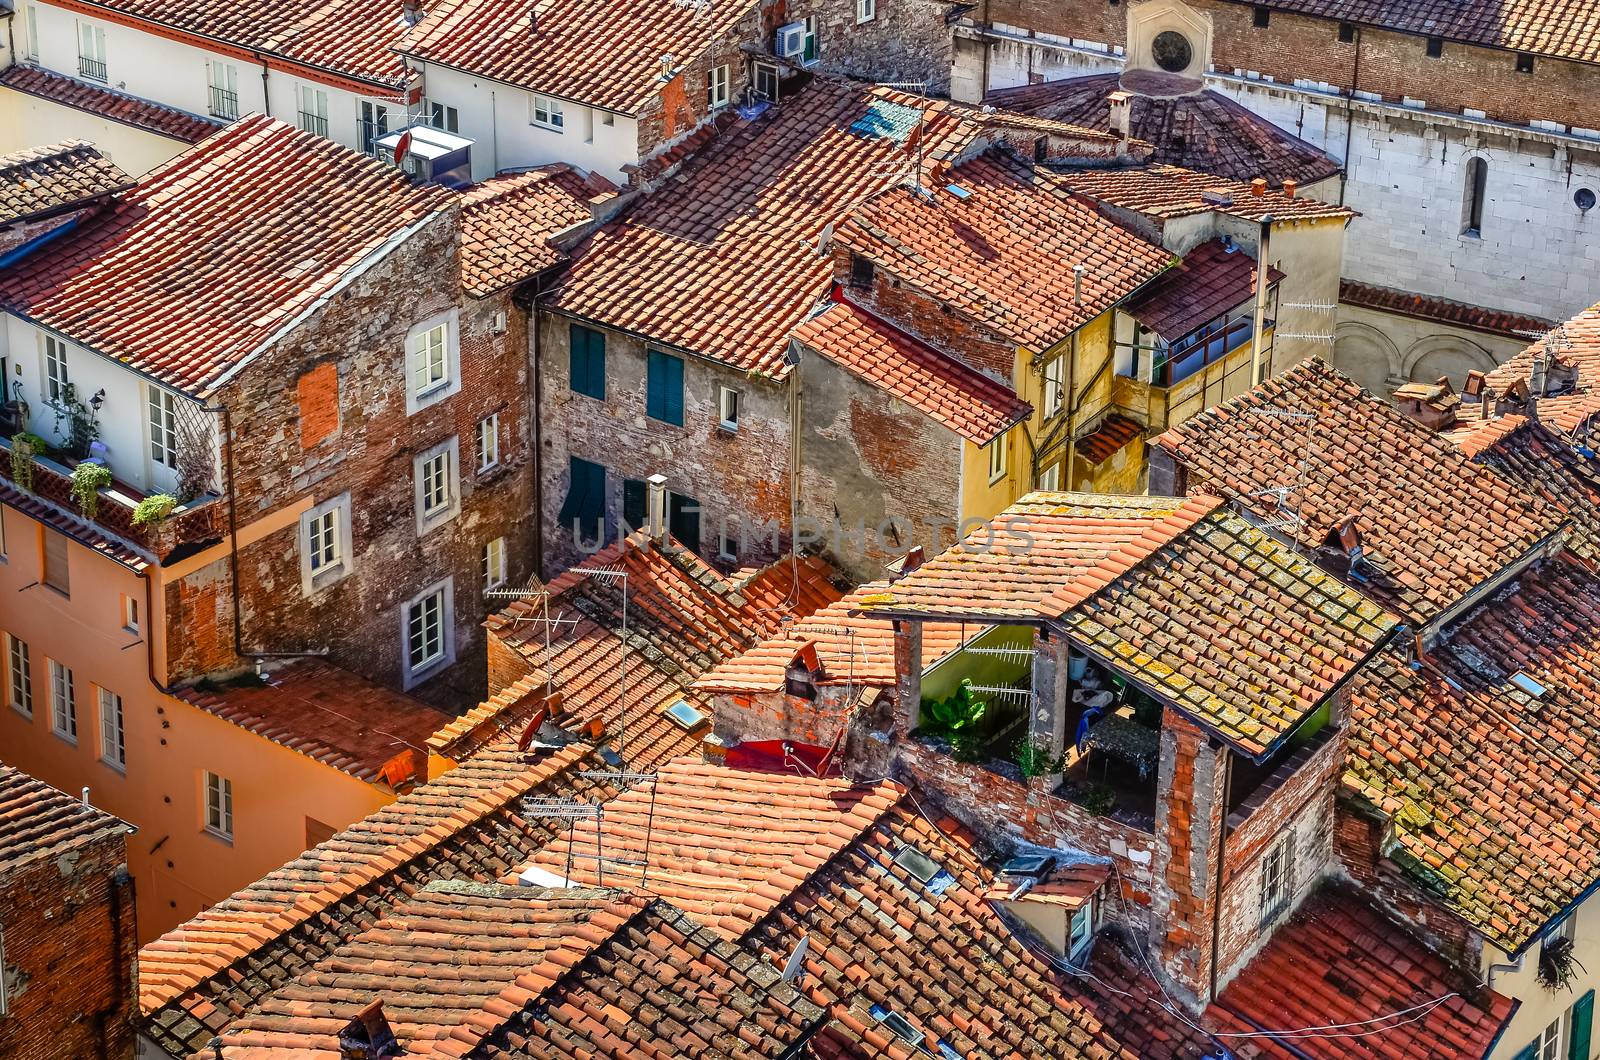 Detail view of traditional Italian town roofs and houses, Lucca, Italy